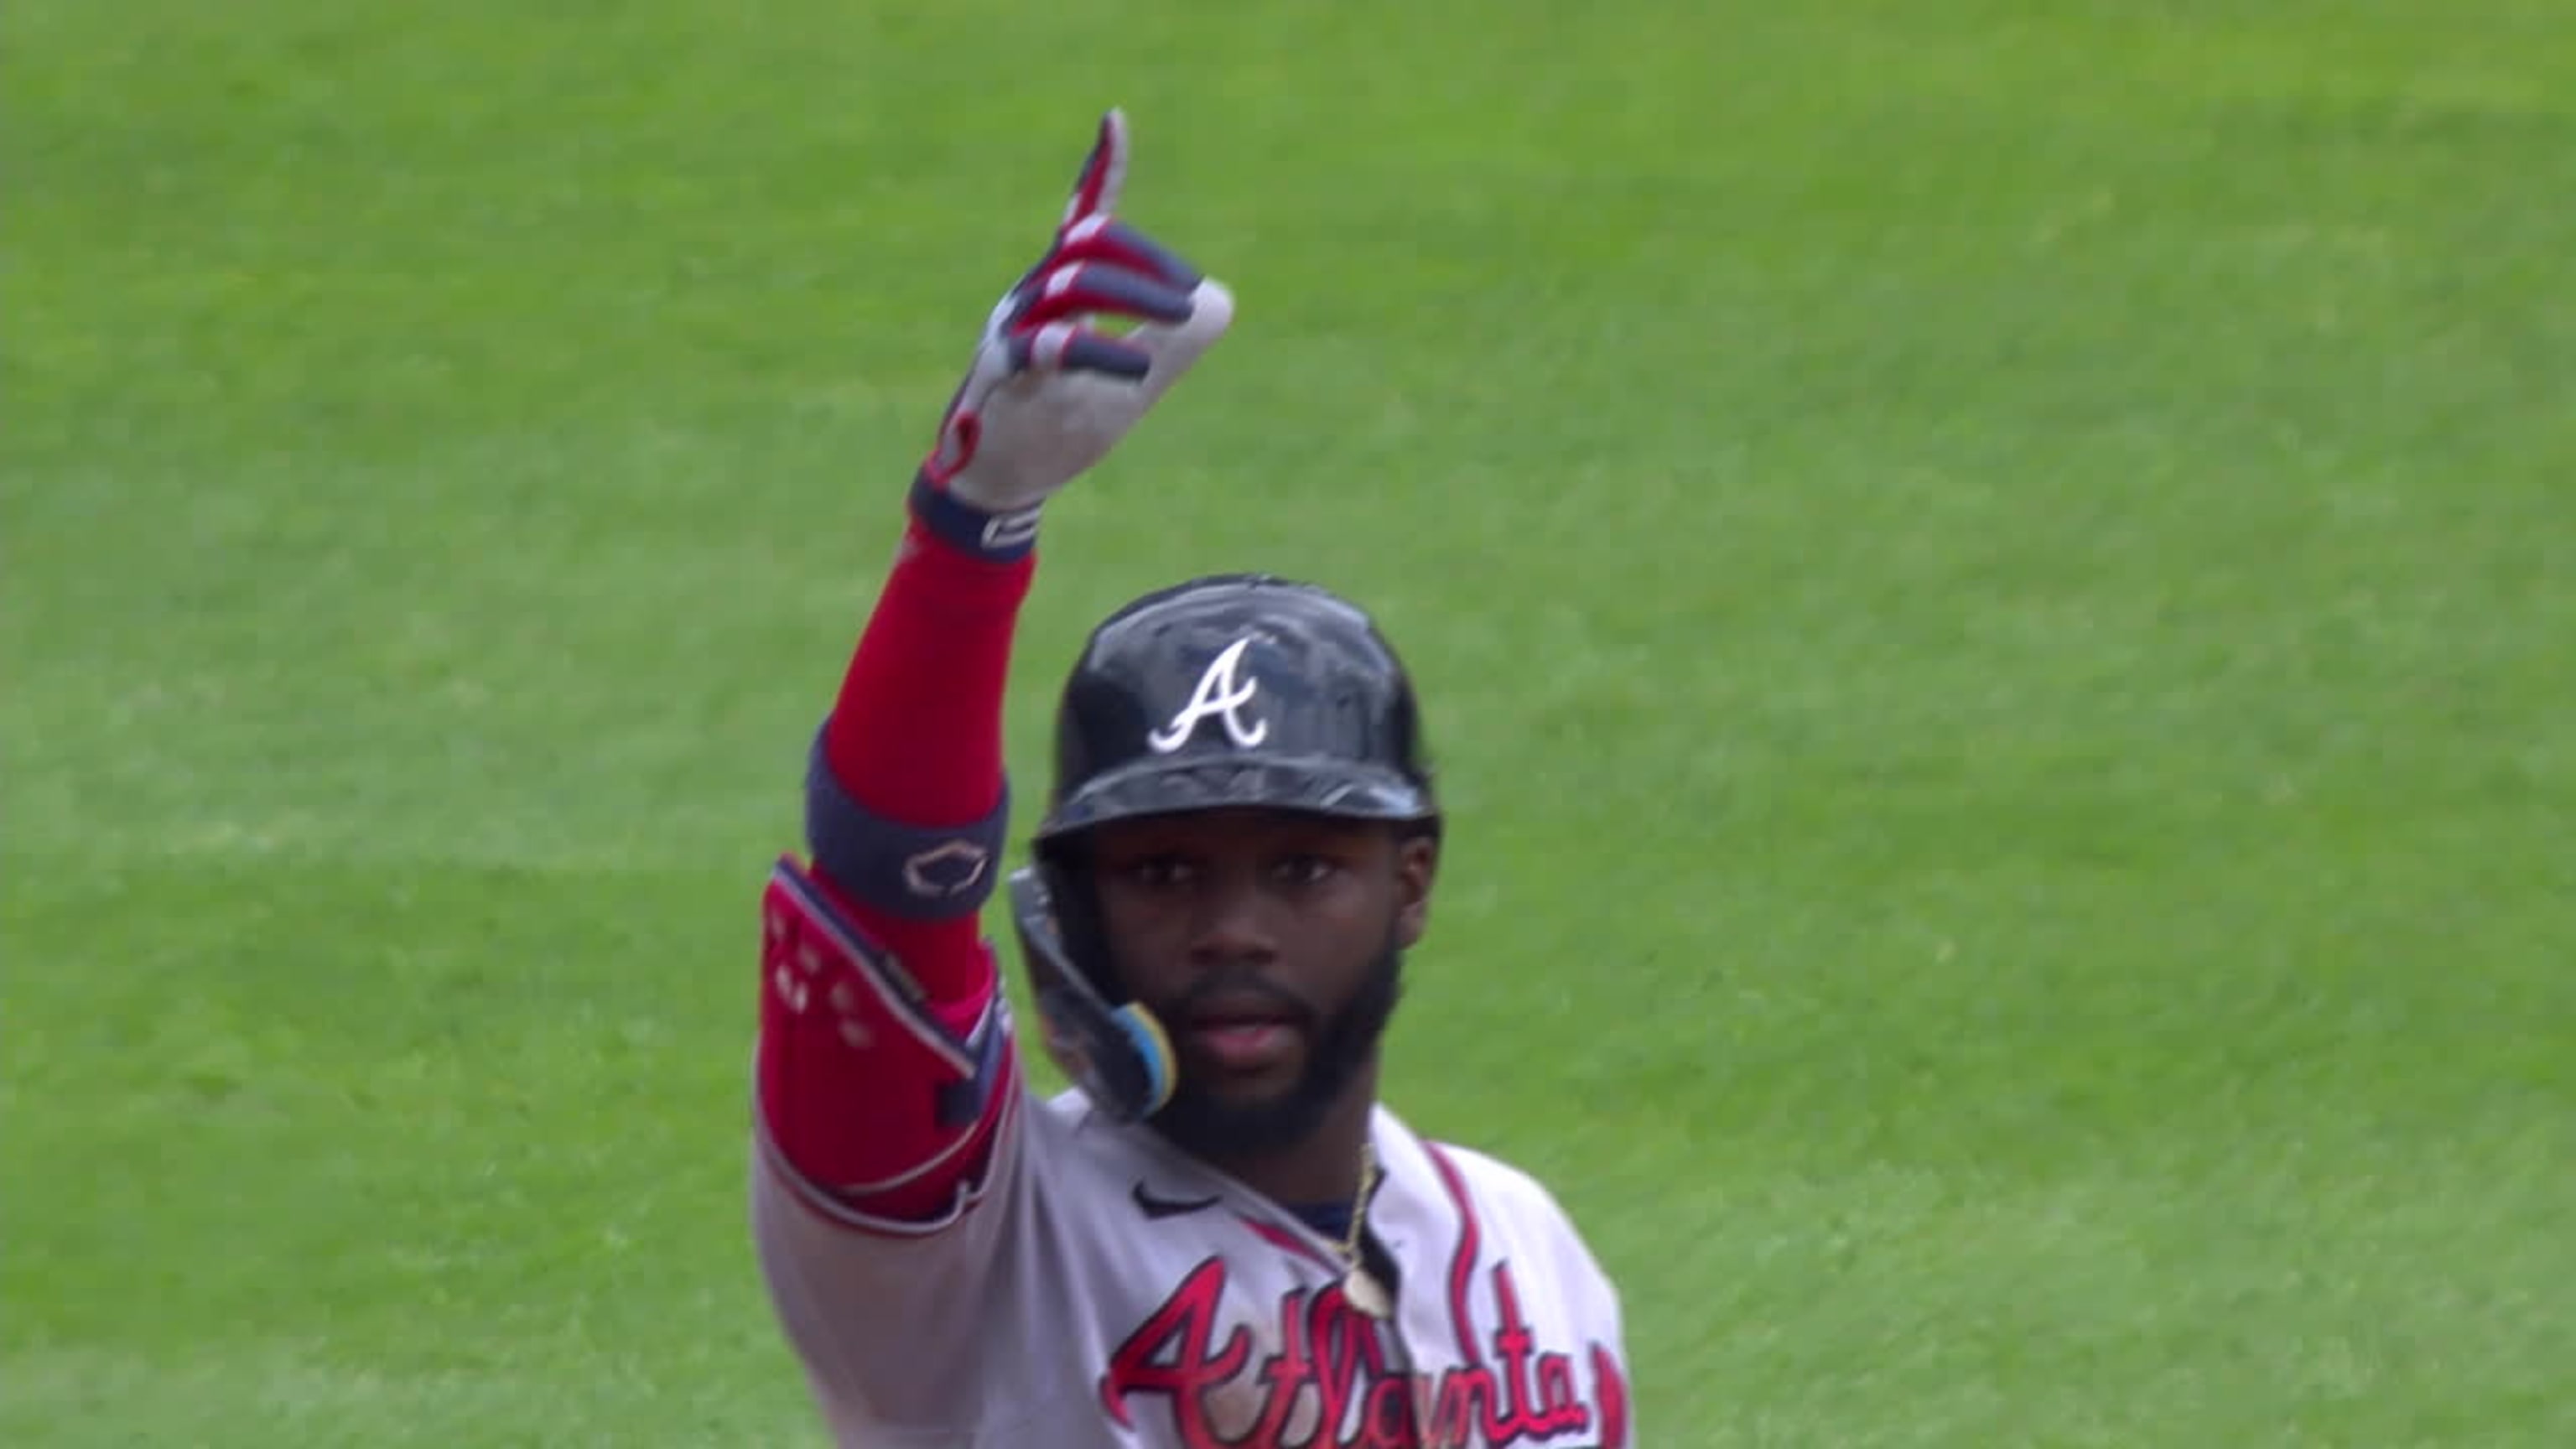 Rosario homer leads Braves to sweep Tigers in doubleheader